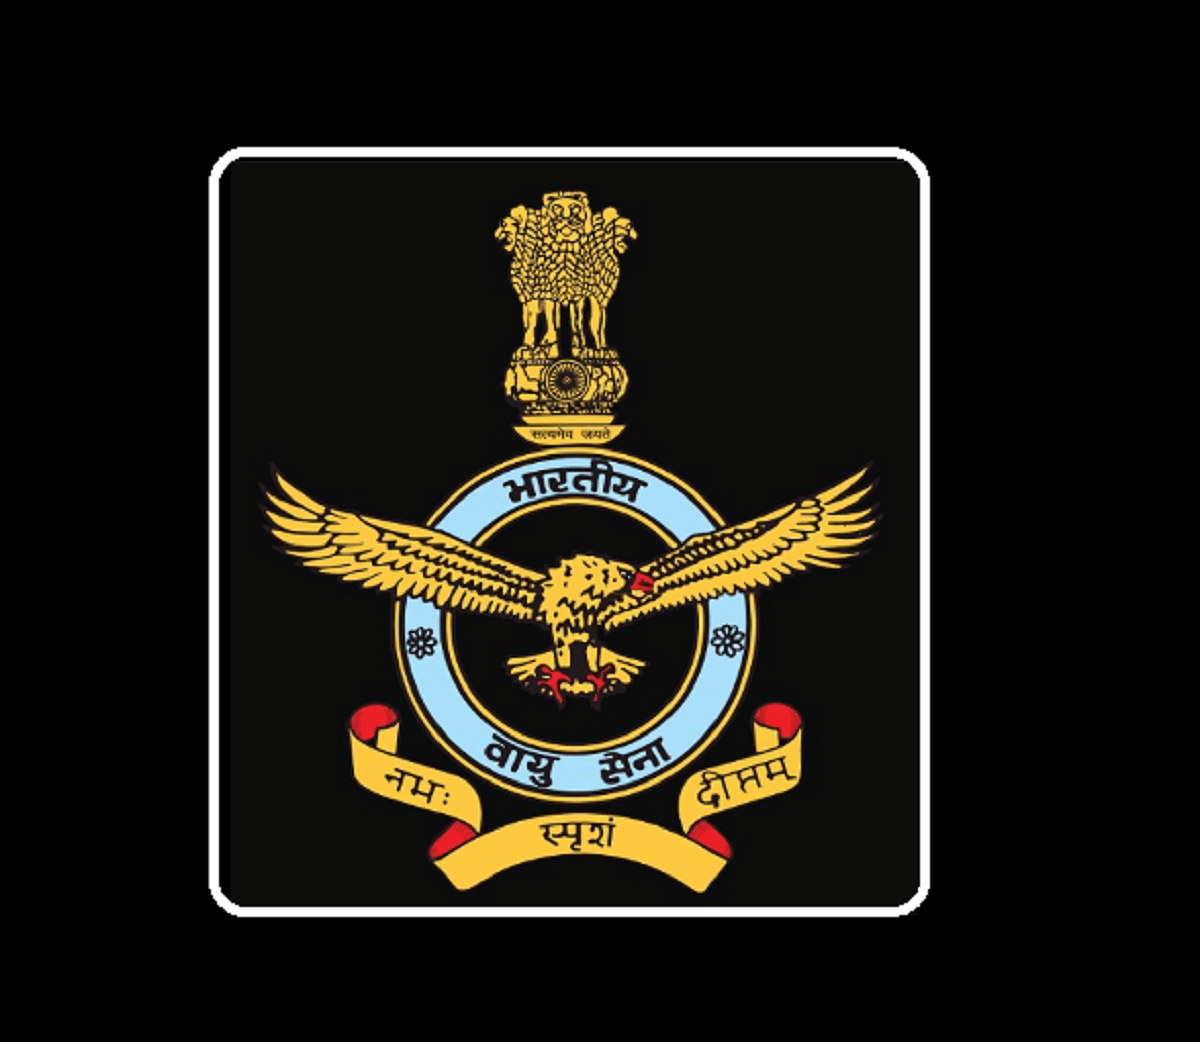 AFCAT 2020: Application Process Begins Today, Check Steps to Apply